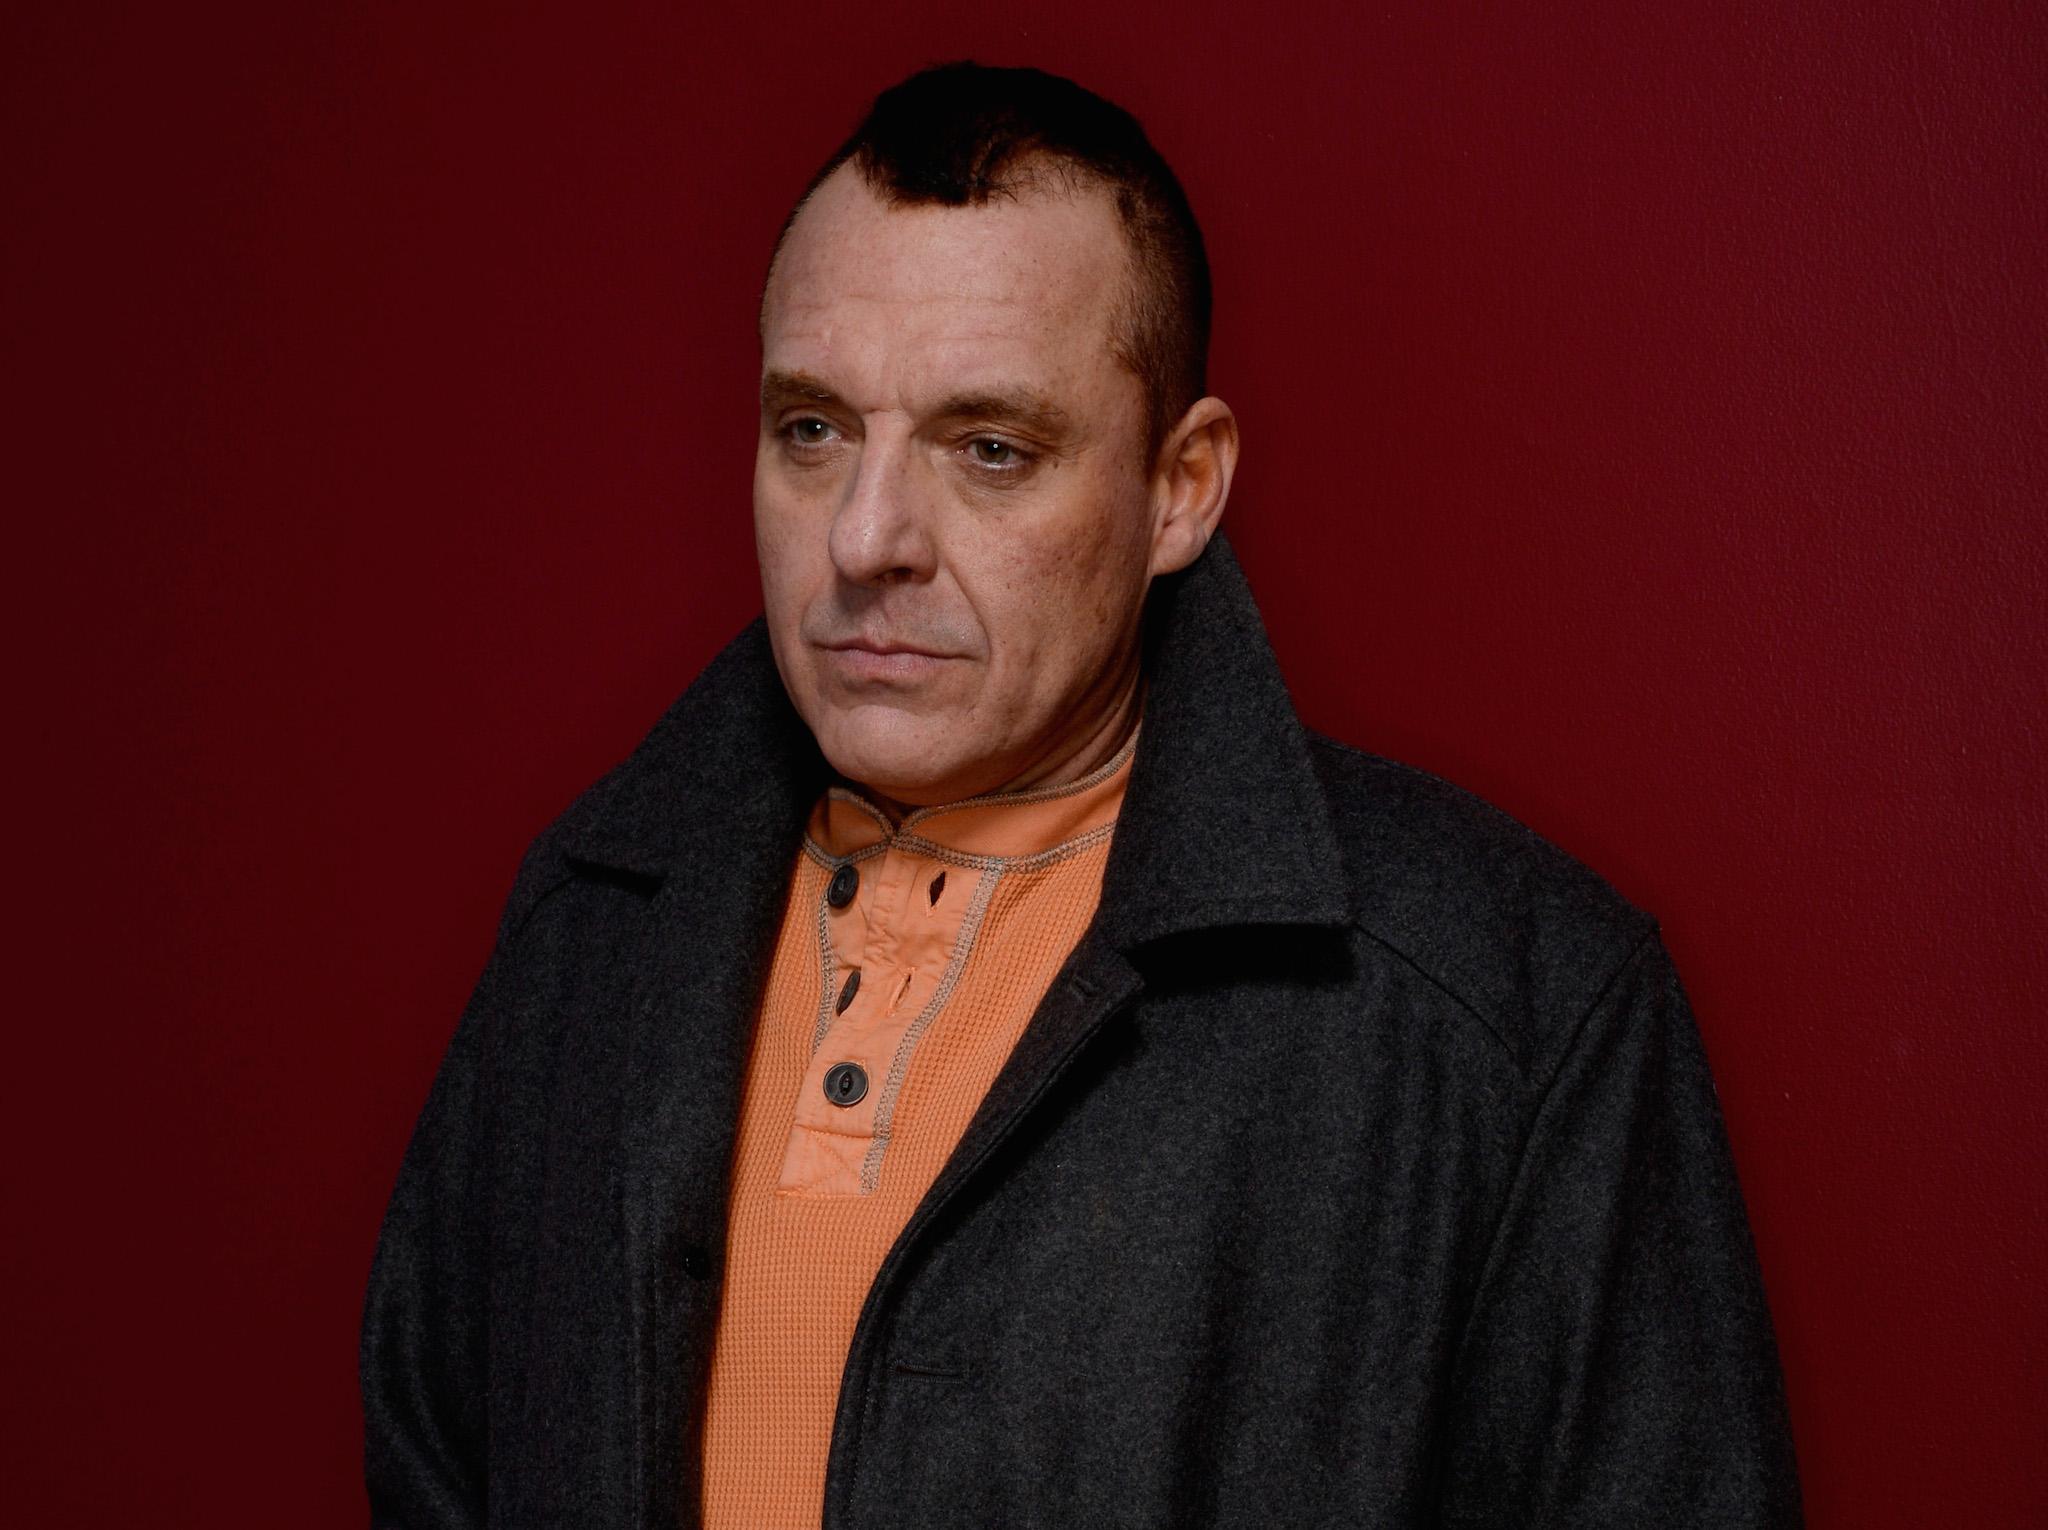 Tom Sizemore poses for a portrait during the 2014 Sundance Film Festival (Photo by Larry Busacca/Getty Images)